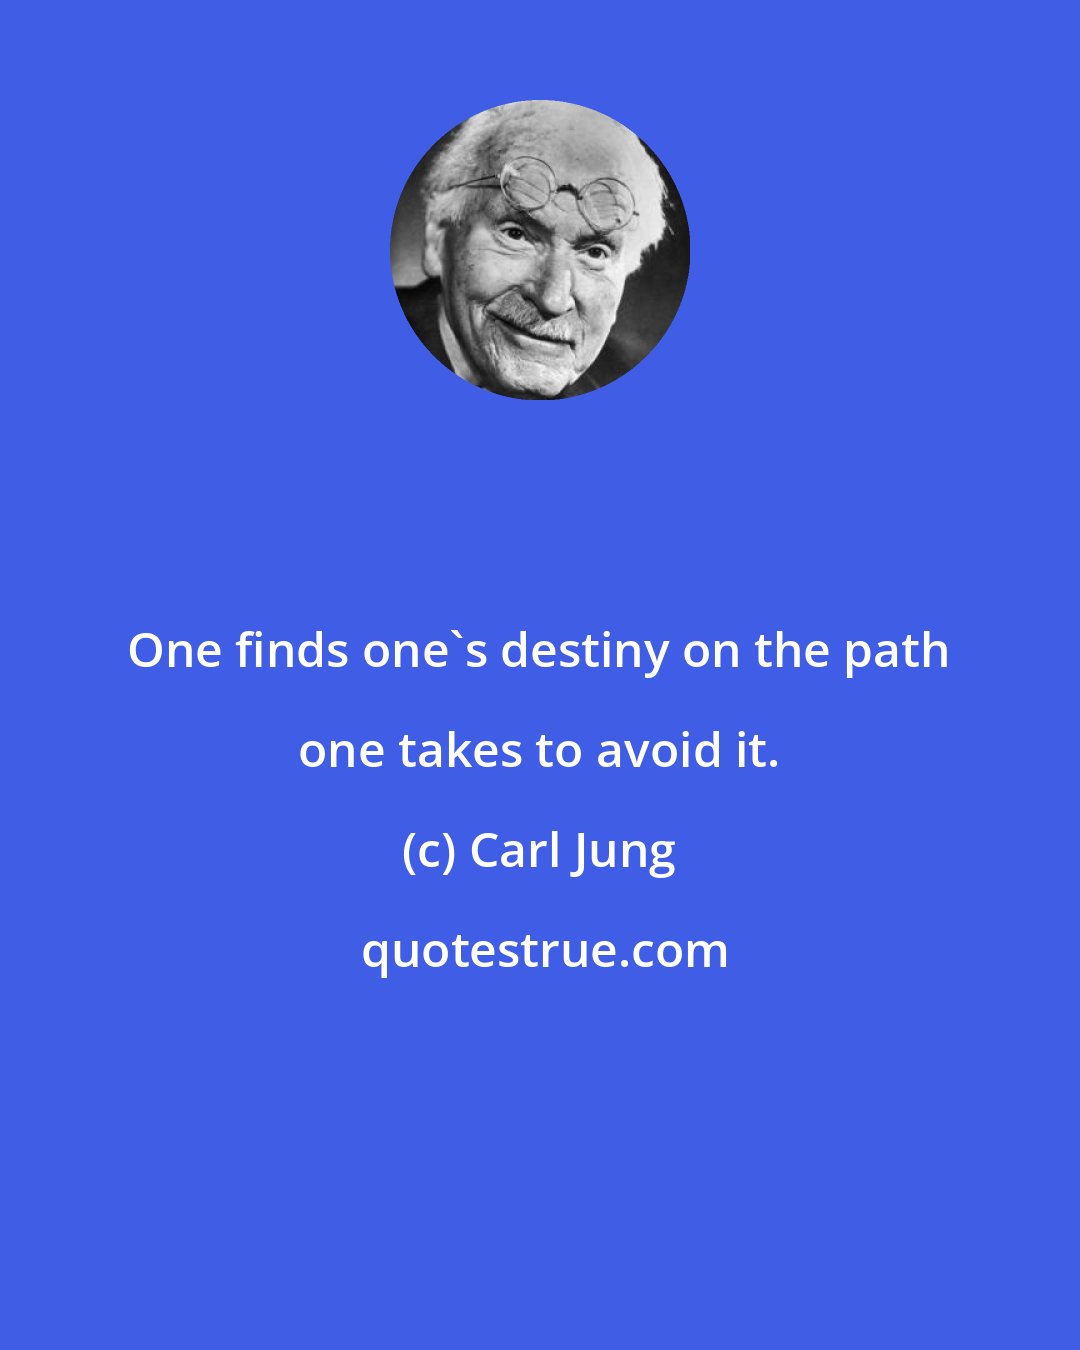 Carl Jung: One finds one's destiny on the path one takes to avoid it.